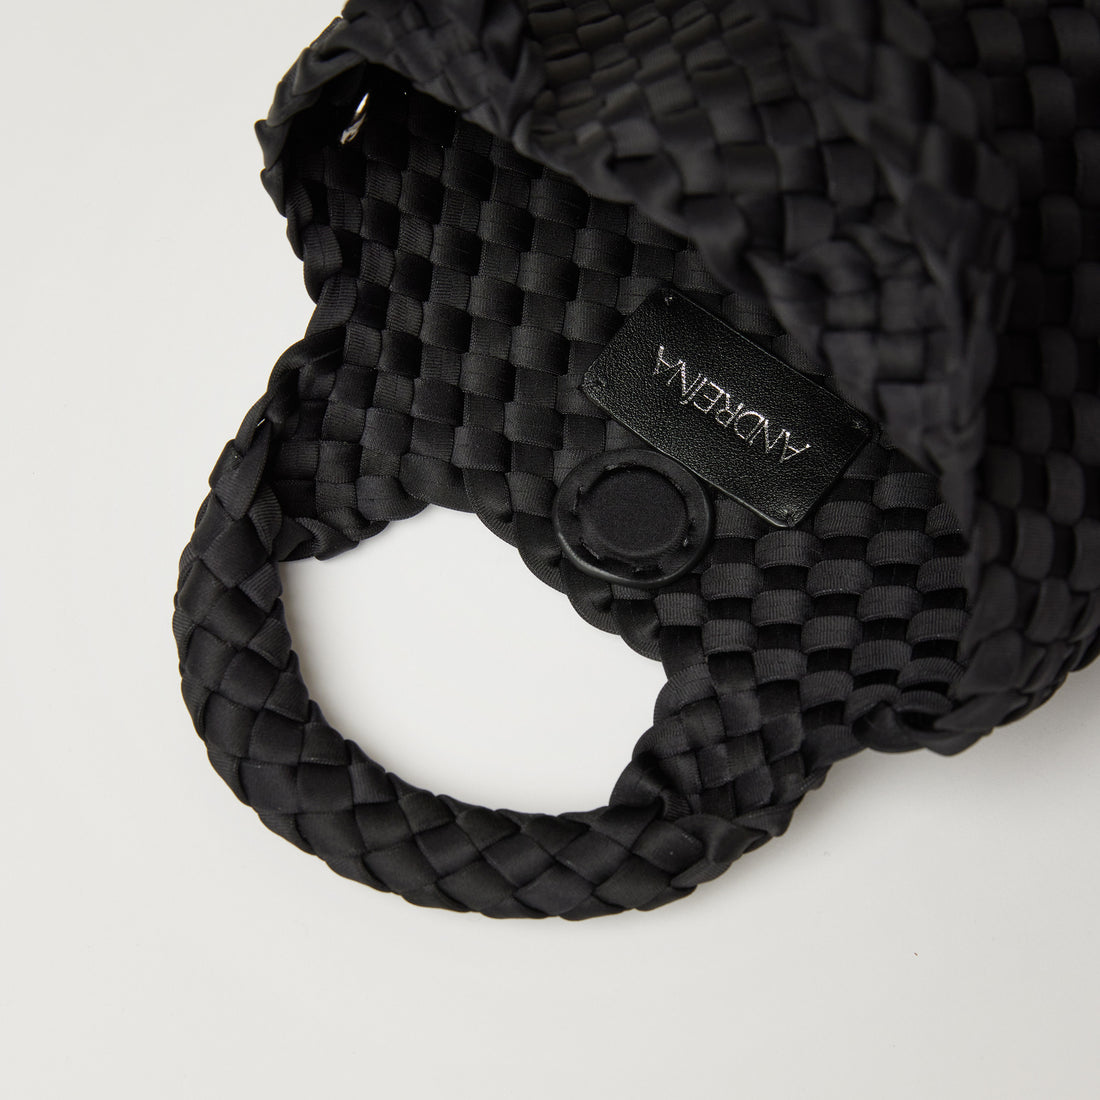 Andreina Bags Lupe crossbody bag in black colour. small size yet roomy. Handmade, interlaced material, synthetic material, water resistant, machine washable, adjustable strap, lightweight. Can be worn as crossbody or as a handbag. Designed in Sydney, Australia.